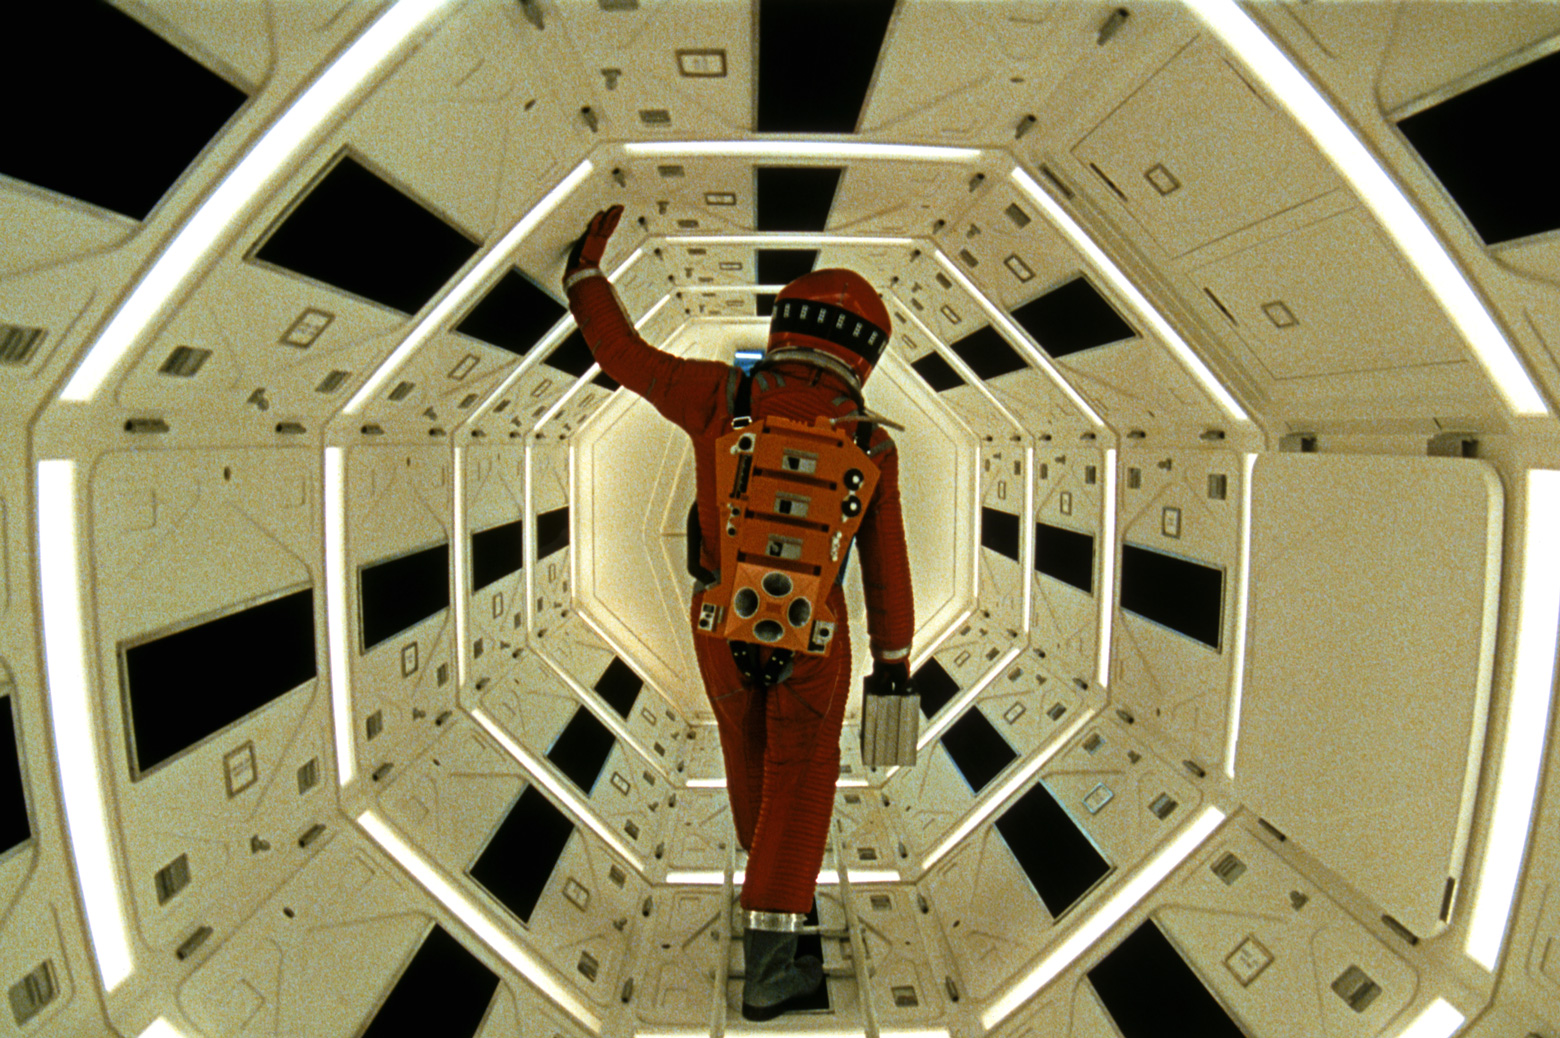 A screen capture from the film 2001: A Space Odyssey